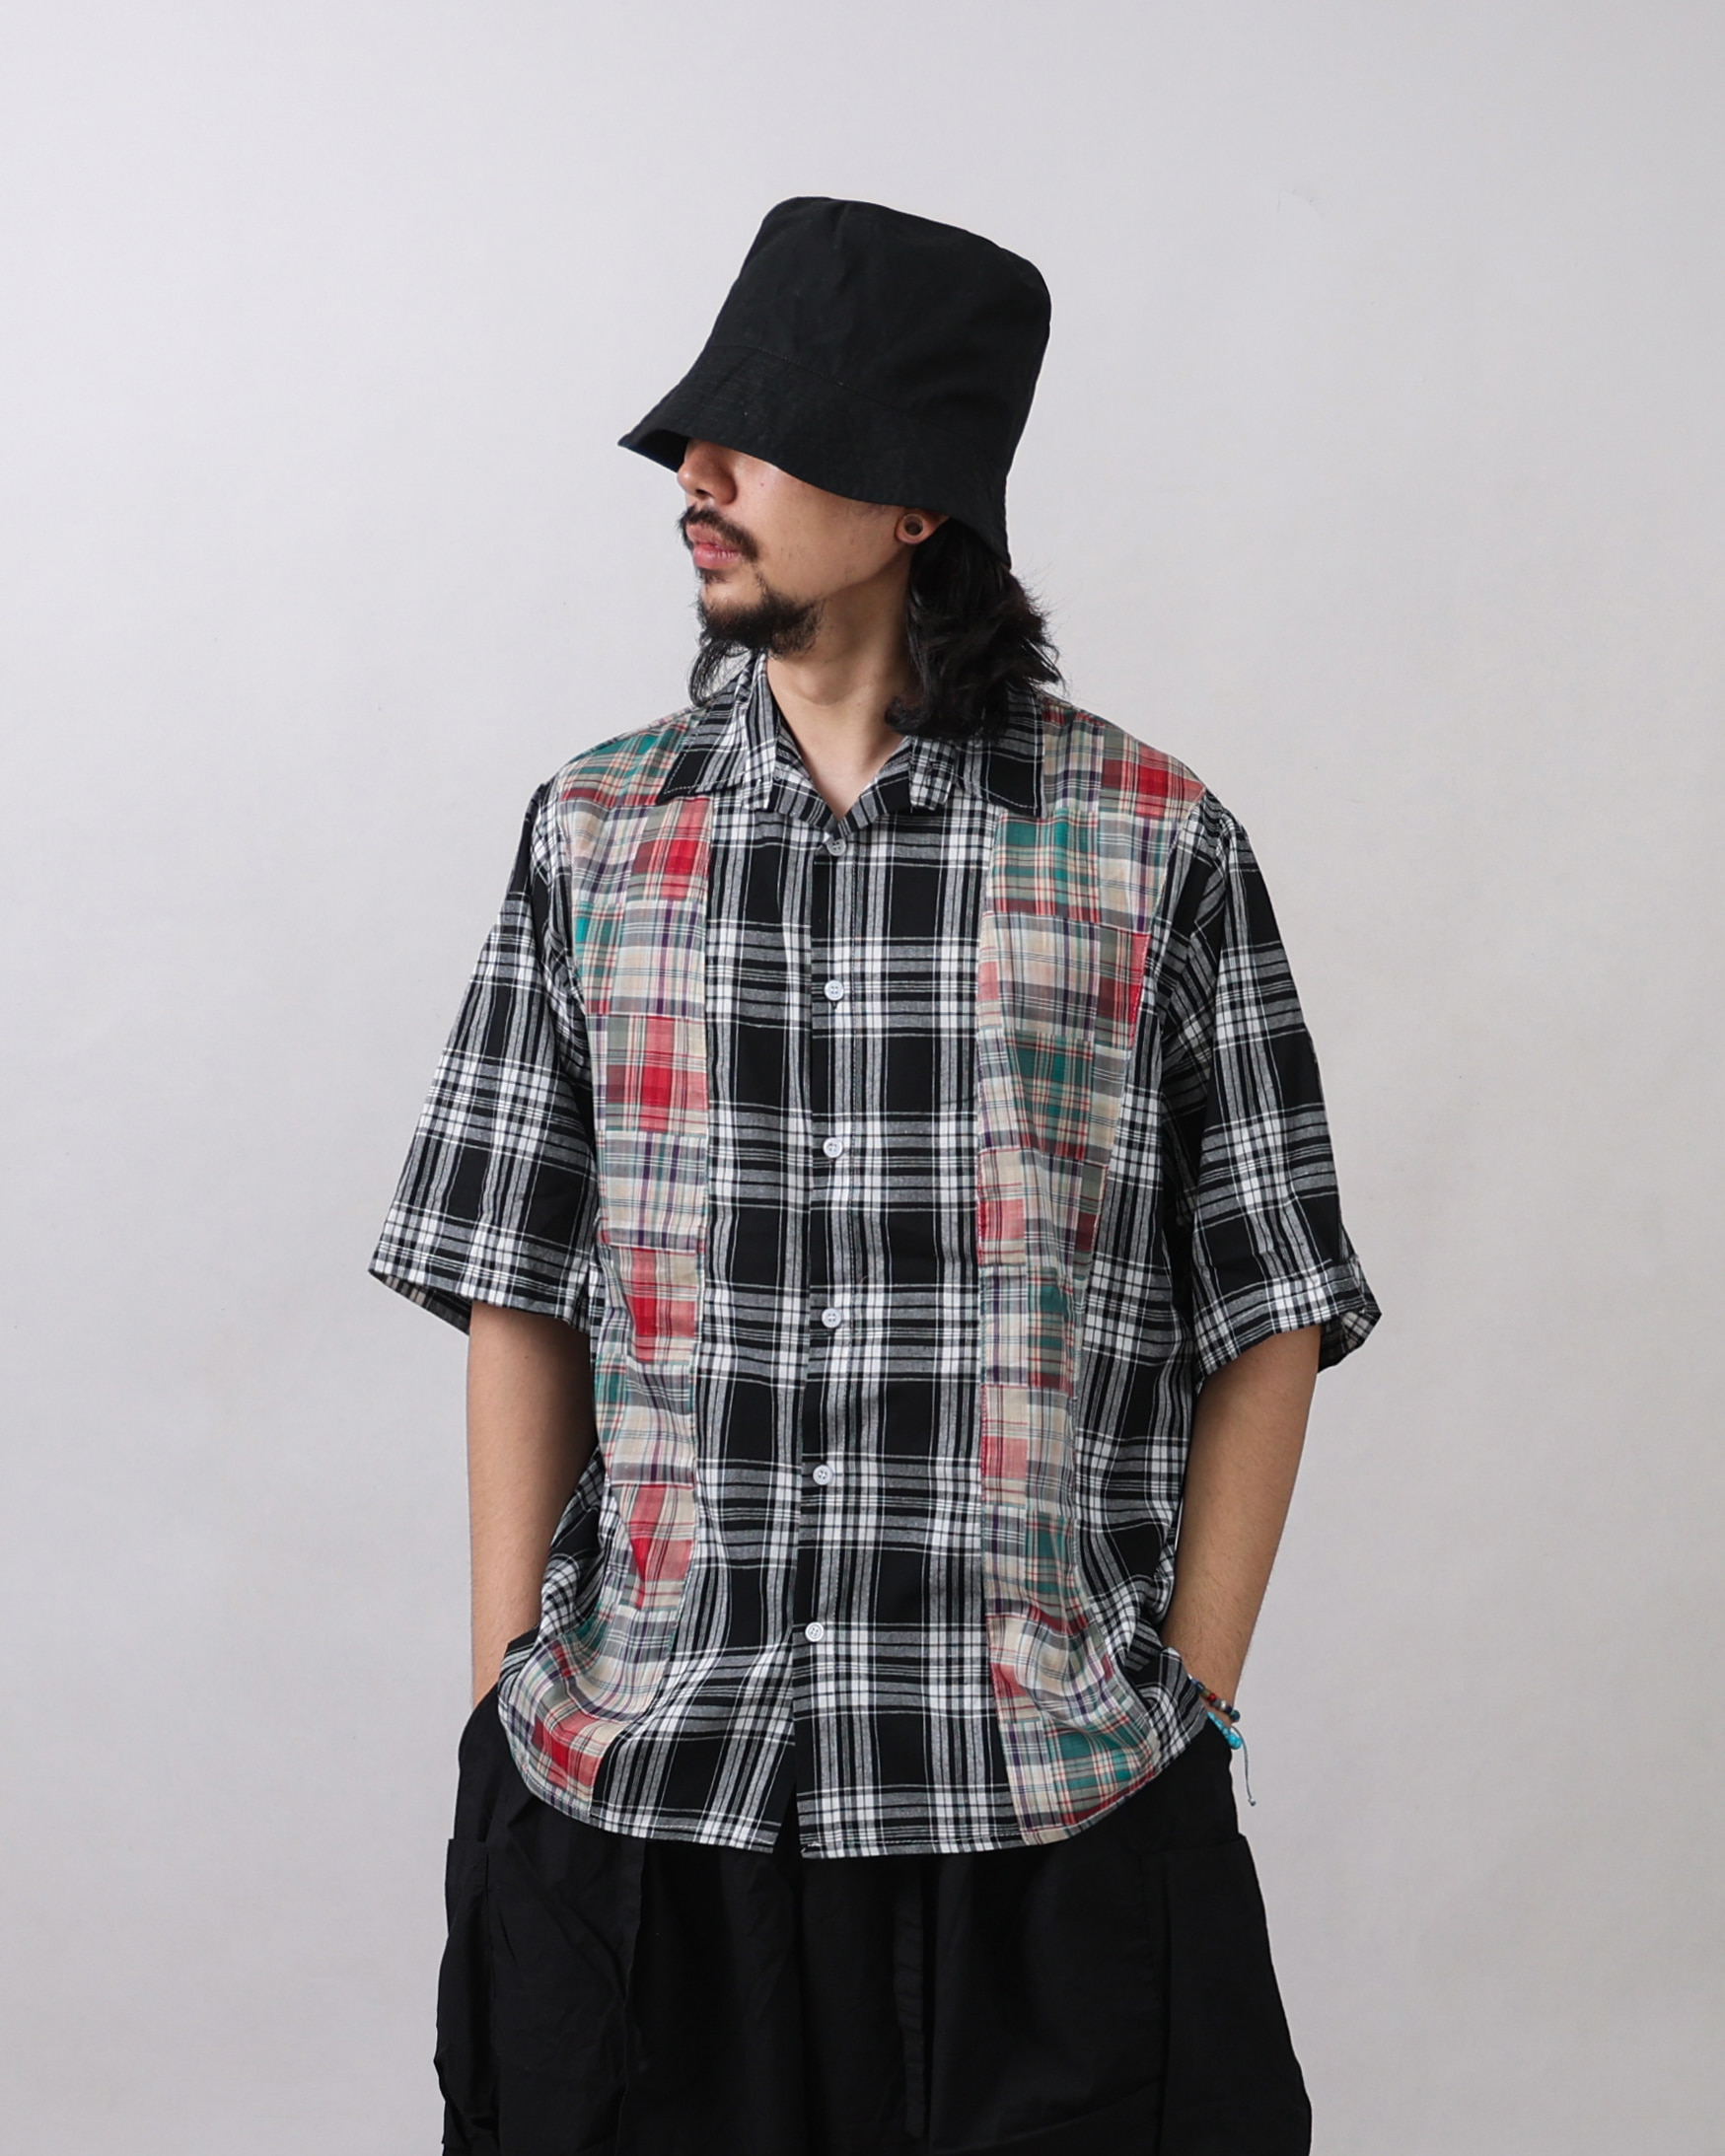 TENSION Patchwork Layered Check Shirts